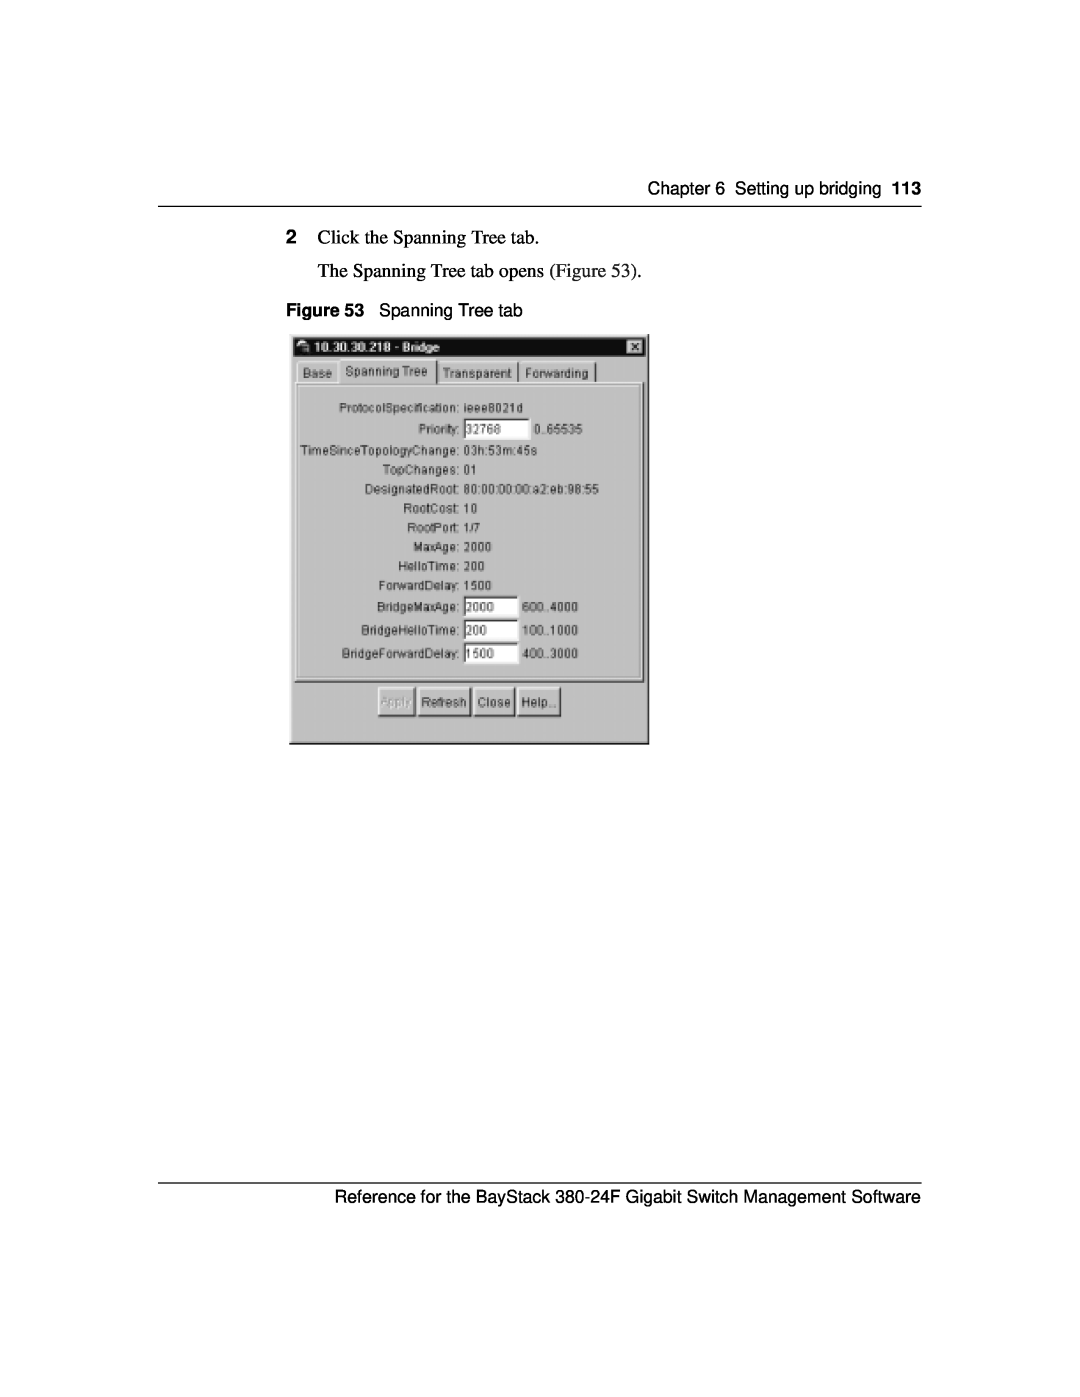 Nortel Networks 214393-A manual 2Click the Spanning Tree tab, The Spanning Tree tab opens Figure, Setting up bridging 